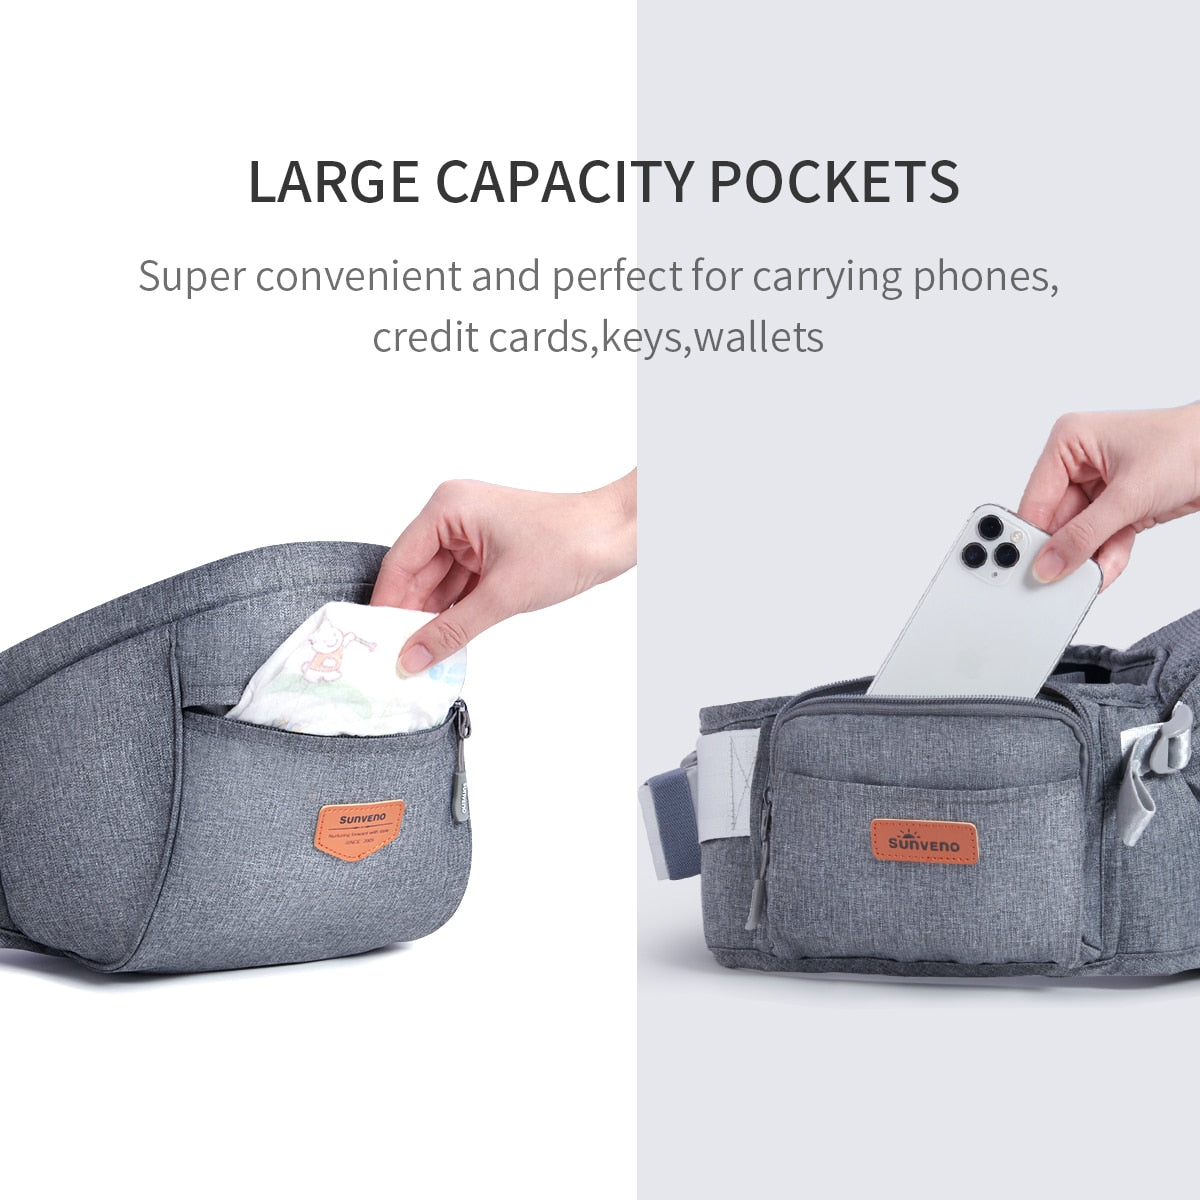 the baby carrier has large capacity pockets for your phone, credit cards, cash, keys, wallet